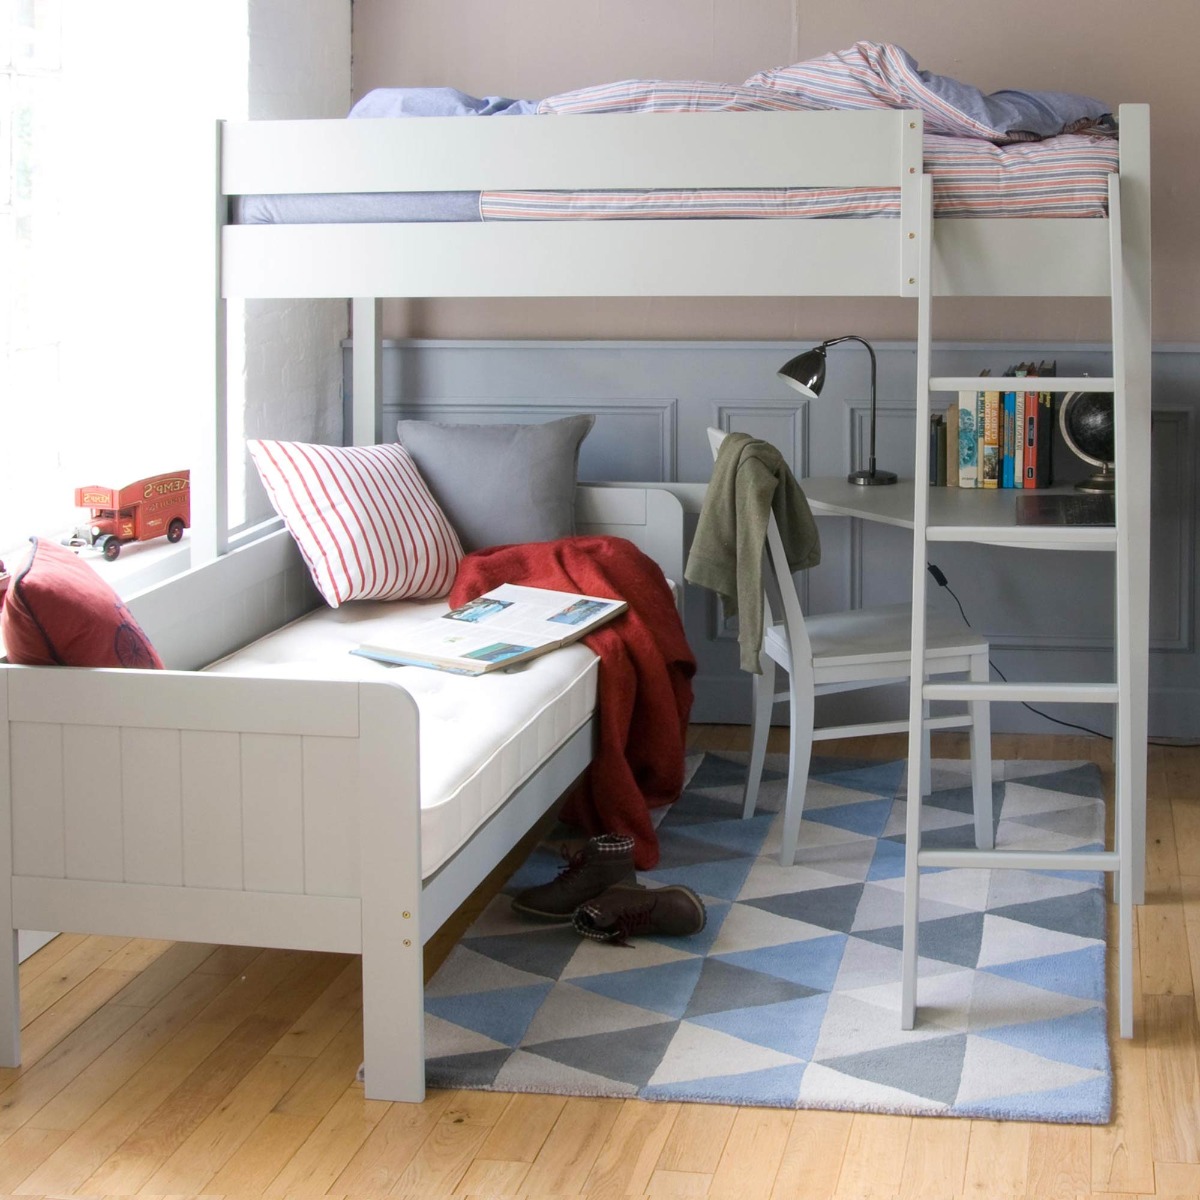 barker and stonehouse bunk beds